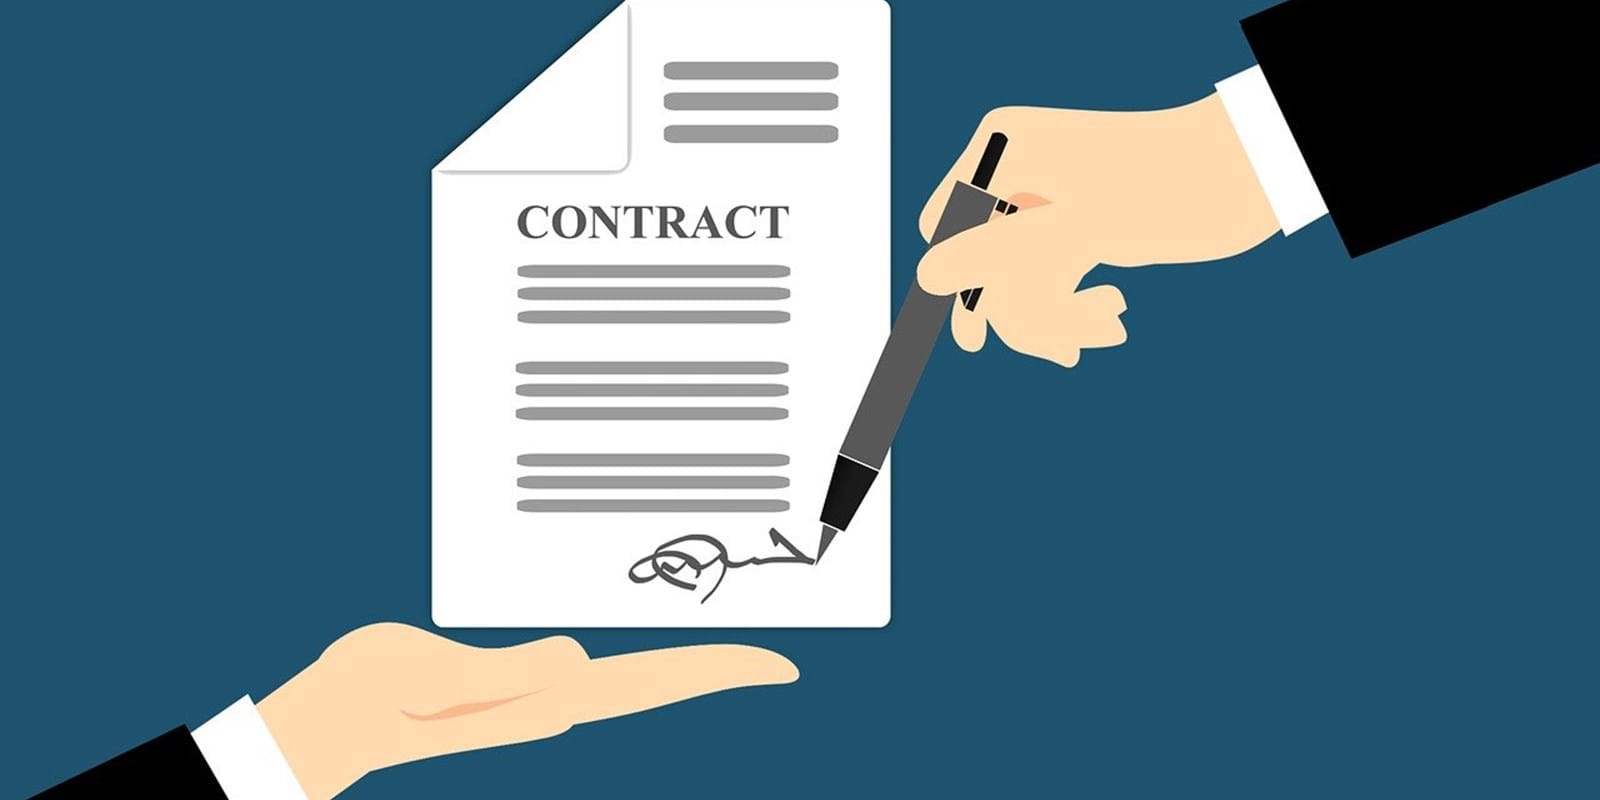 A signed contract does not completely exclude your liability